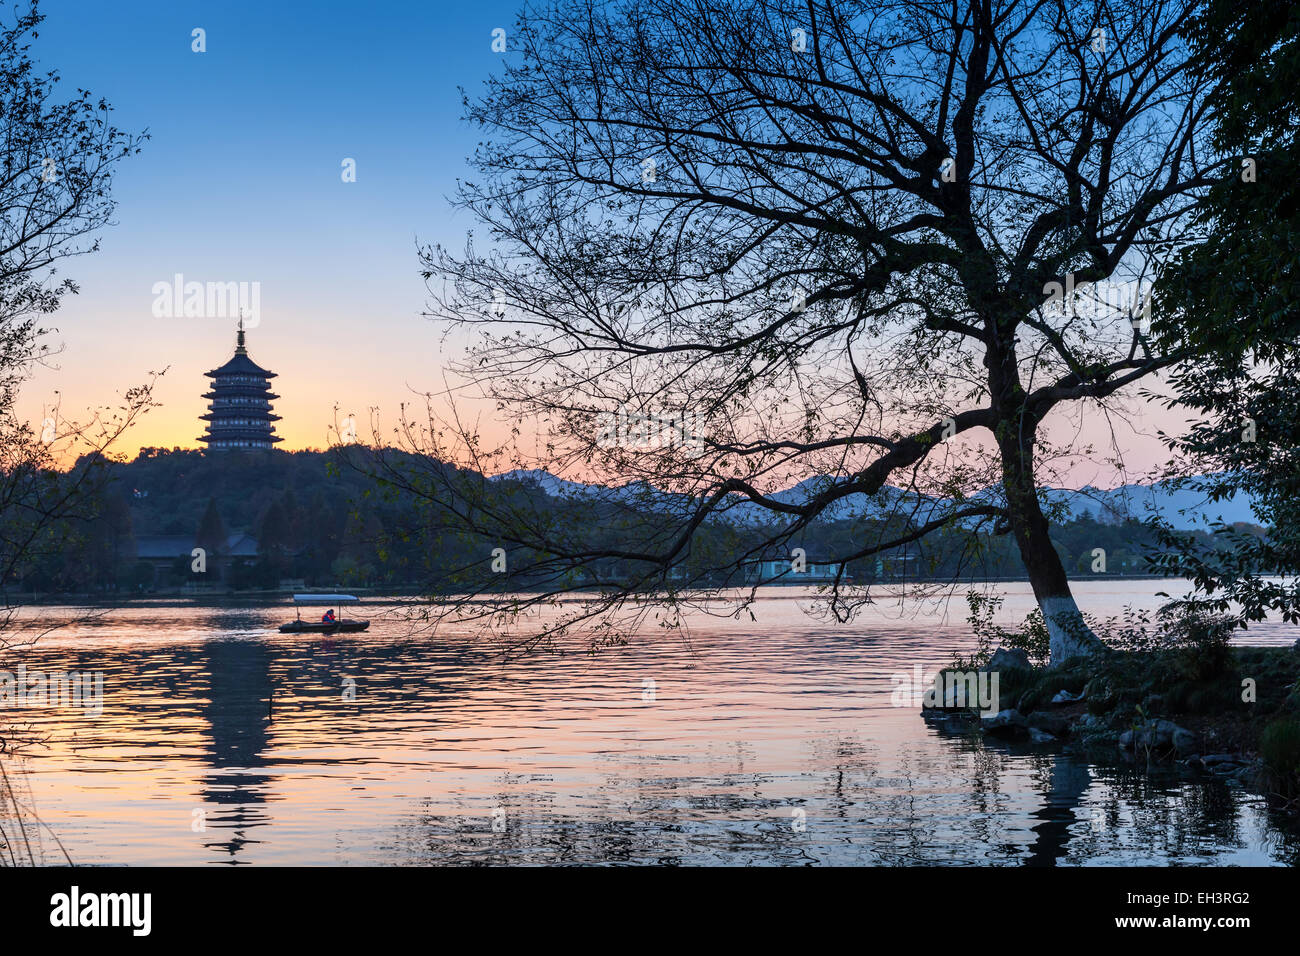 Black trees silhouette and traditional Chinese pagoda on the coast of West Lake. Famous park in Hangzhou city center, China Stock Photo